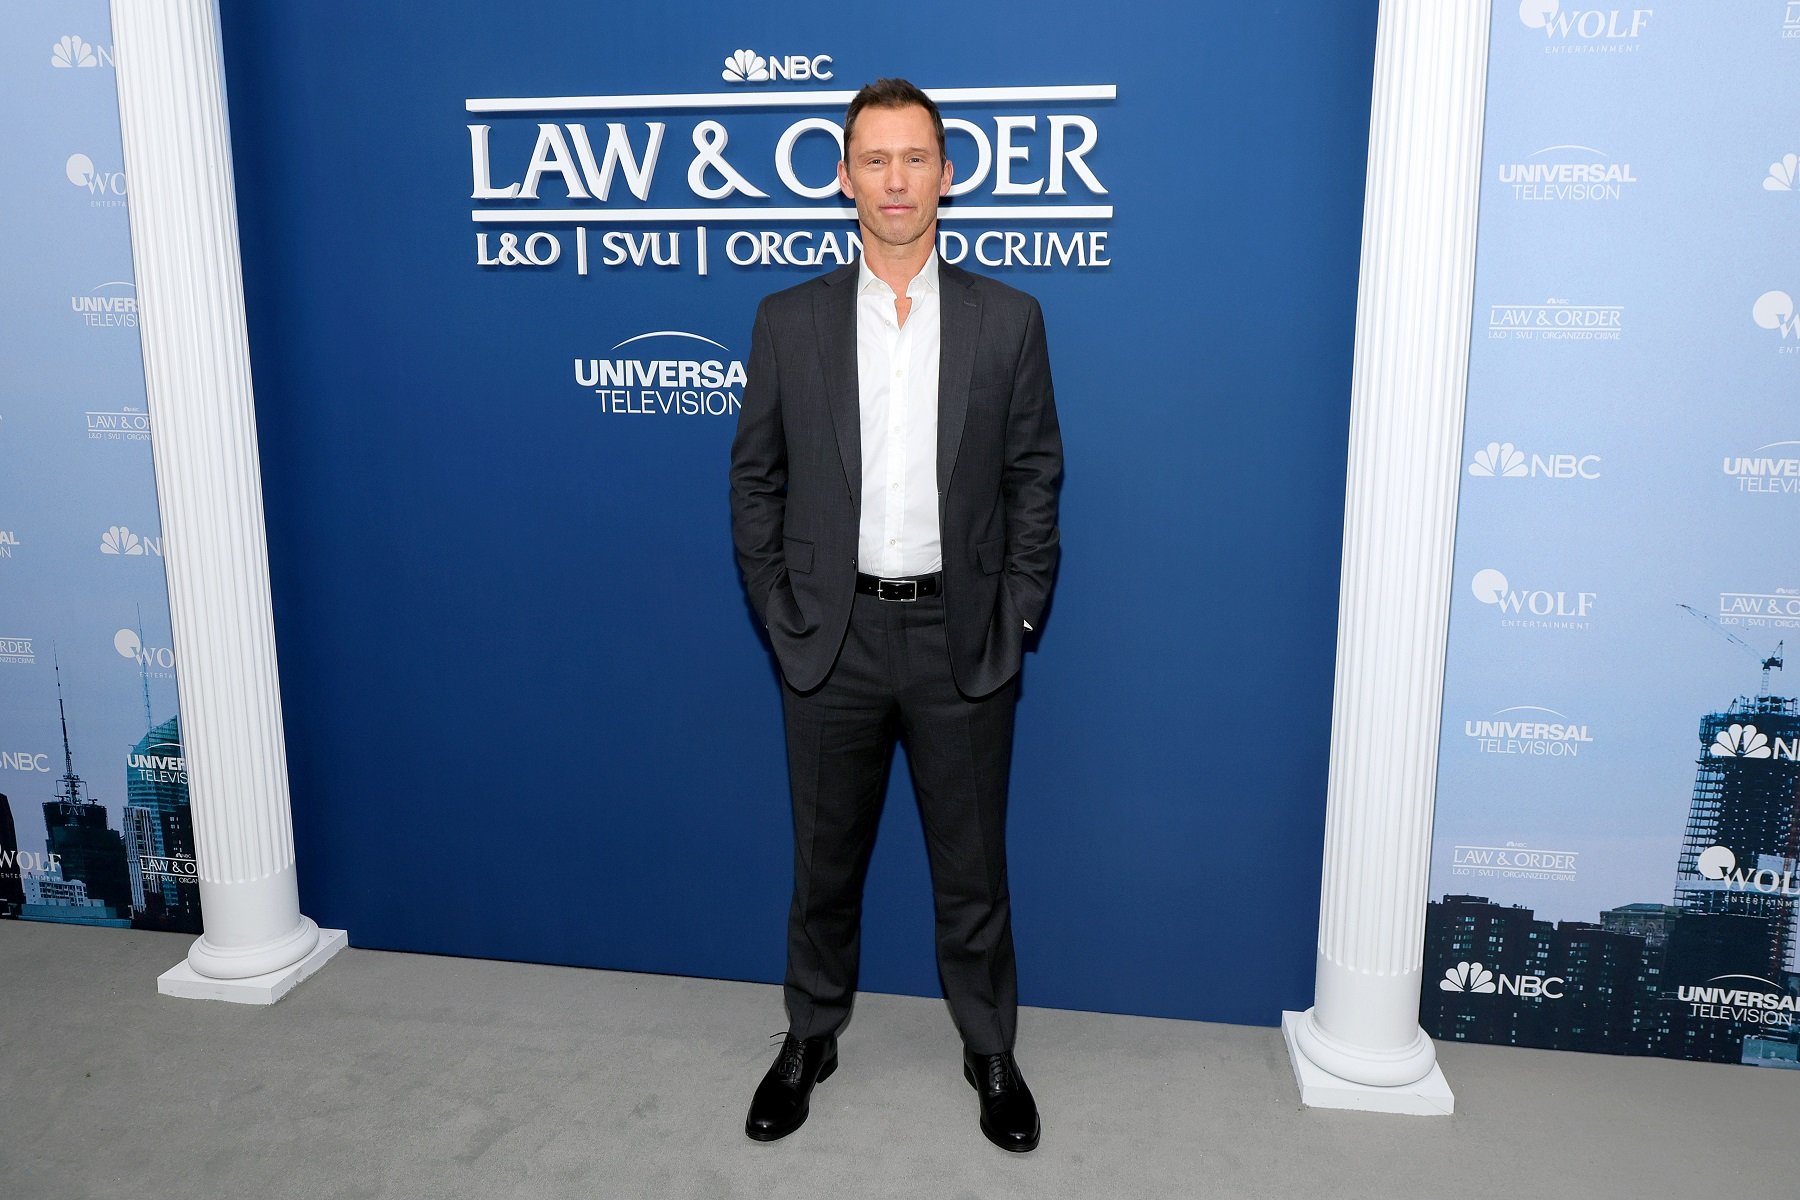 Law & Order star Jeffrey Donovan, who plays Frank Cosgrove, in a blue tailored suit